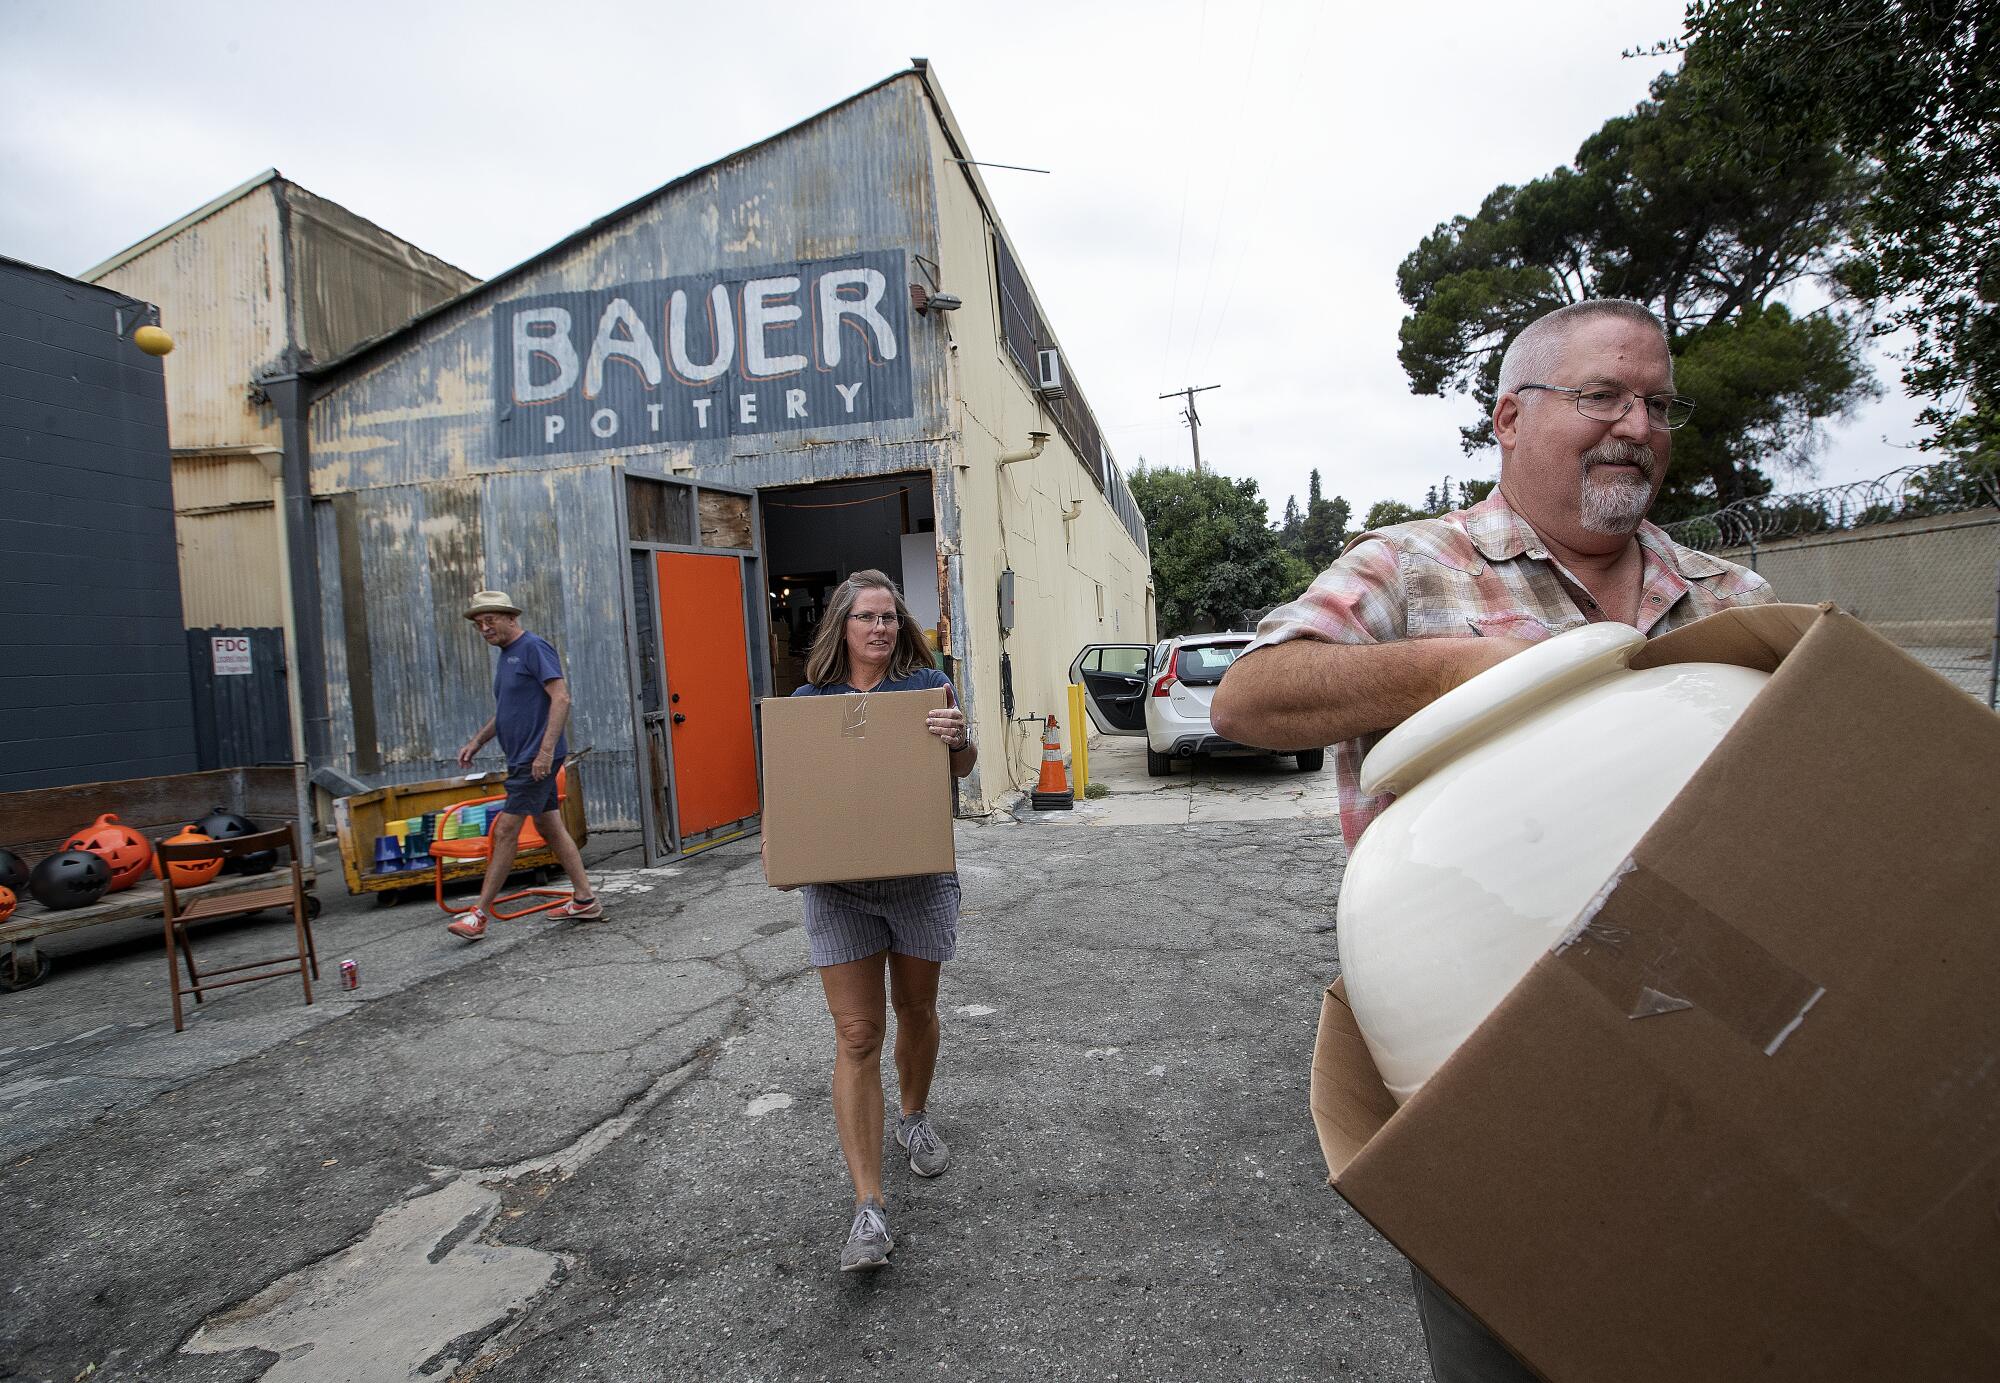 A man carries a large pot from an industrial building with a sign reading Bauer Pottery